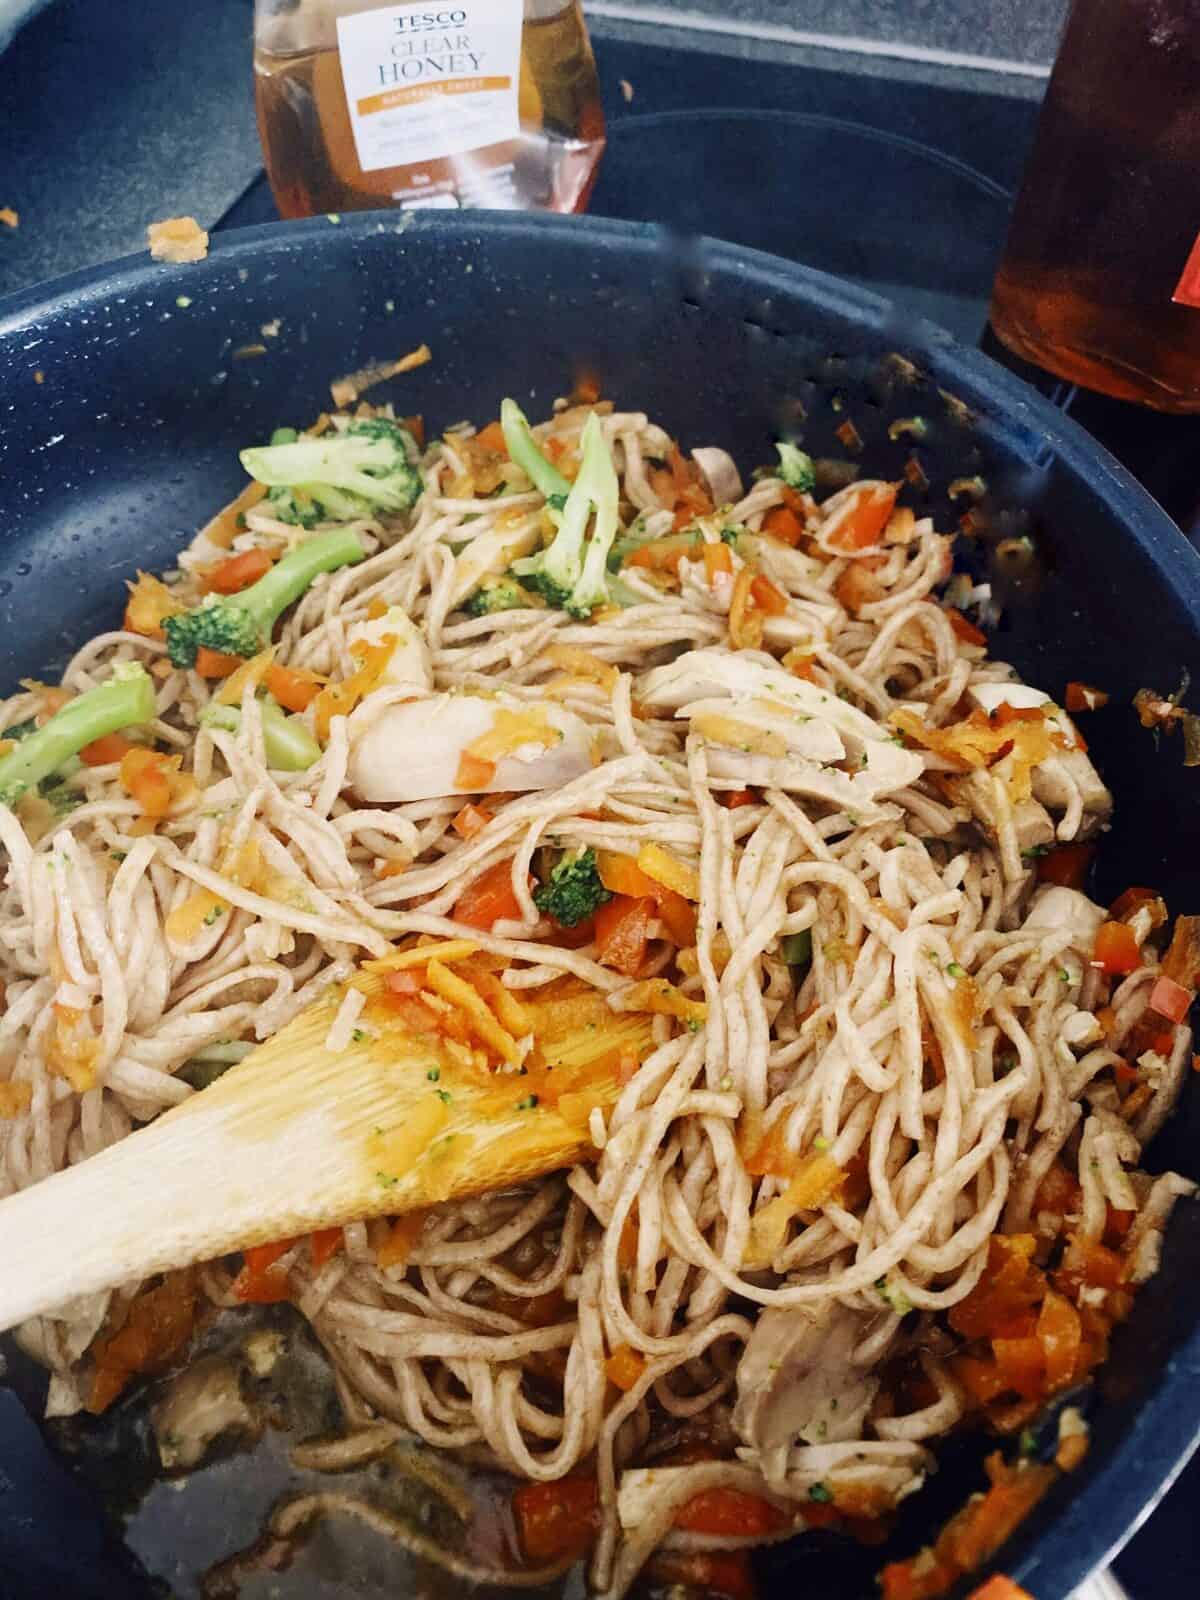 chicken noodles and carrots in frying pan